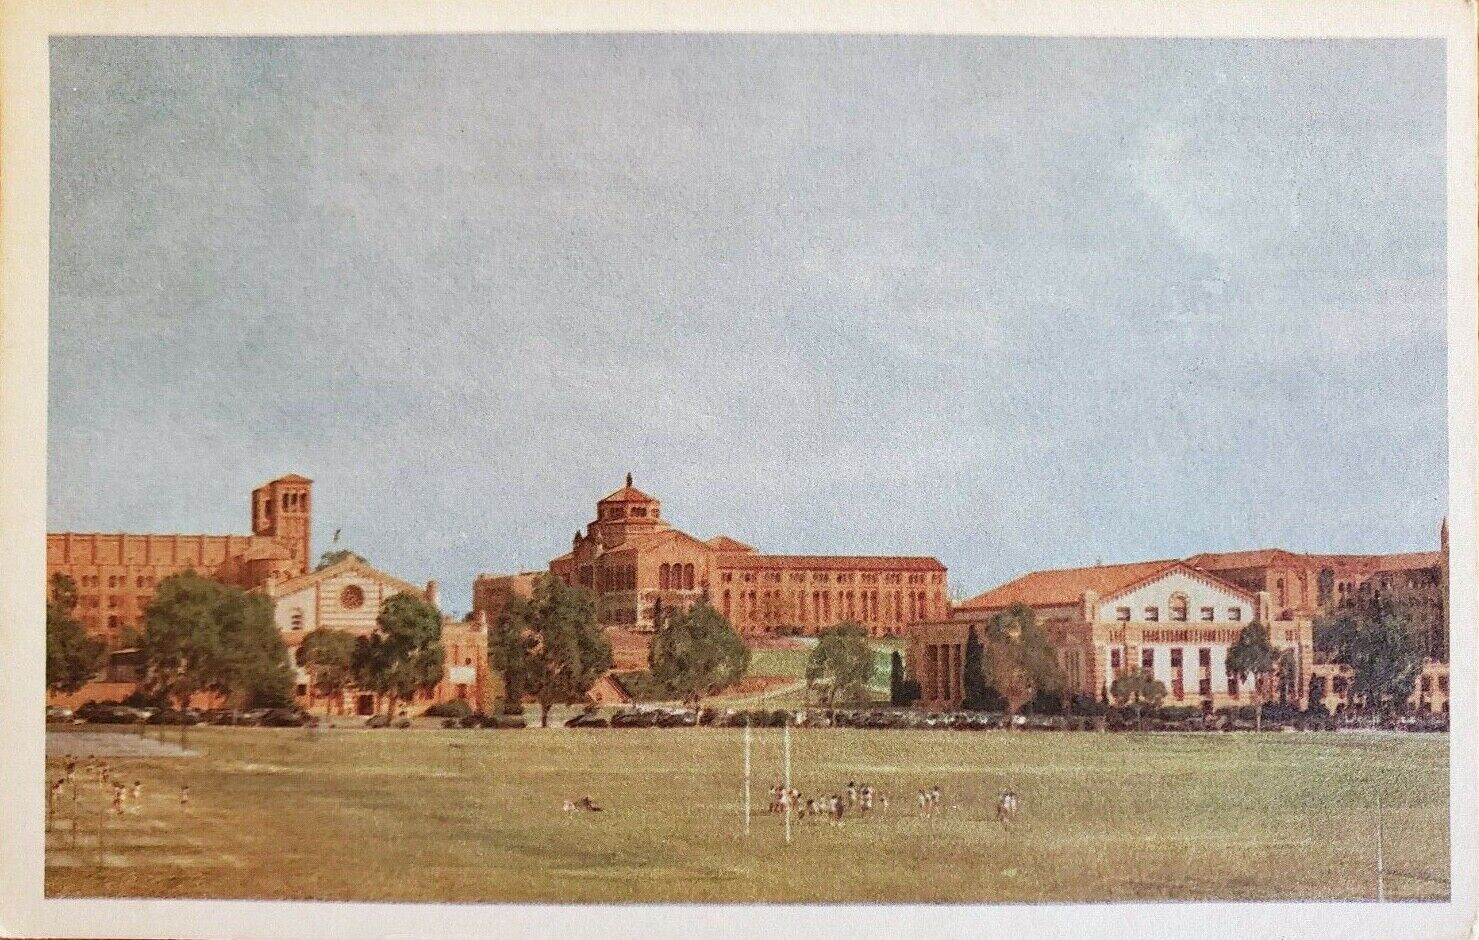 Early UCLA Campus View Intramural Field and Buildings 1930s Vintage Postcard 